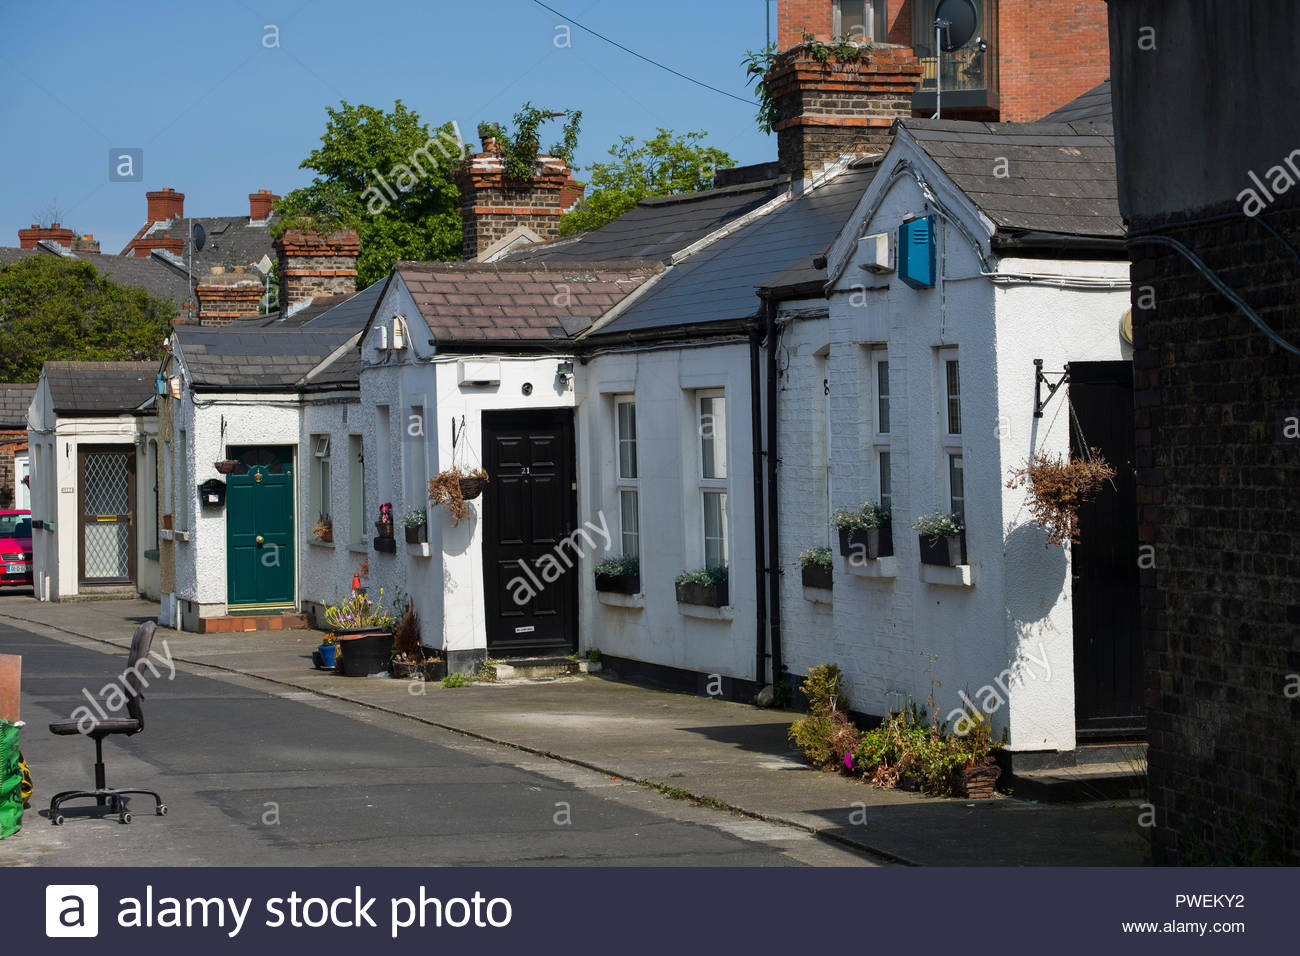 Small Cottages In The Historic Working Class Neighborhood Of The